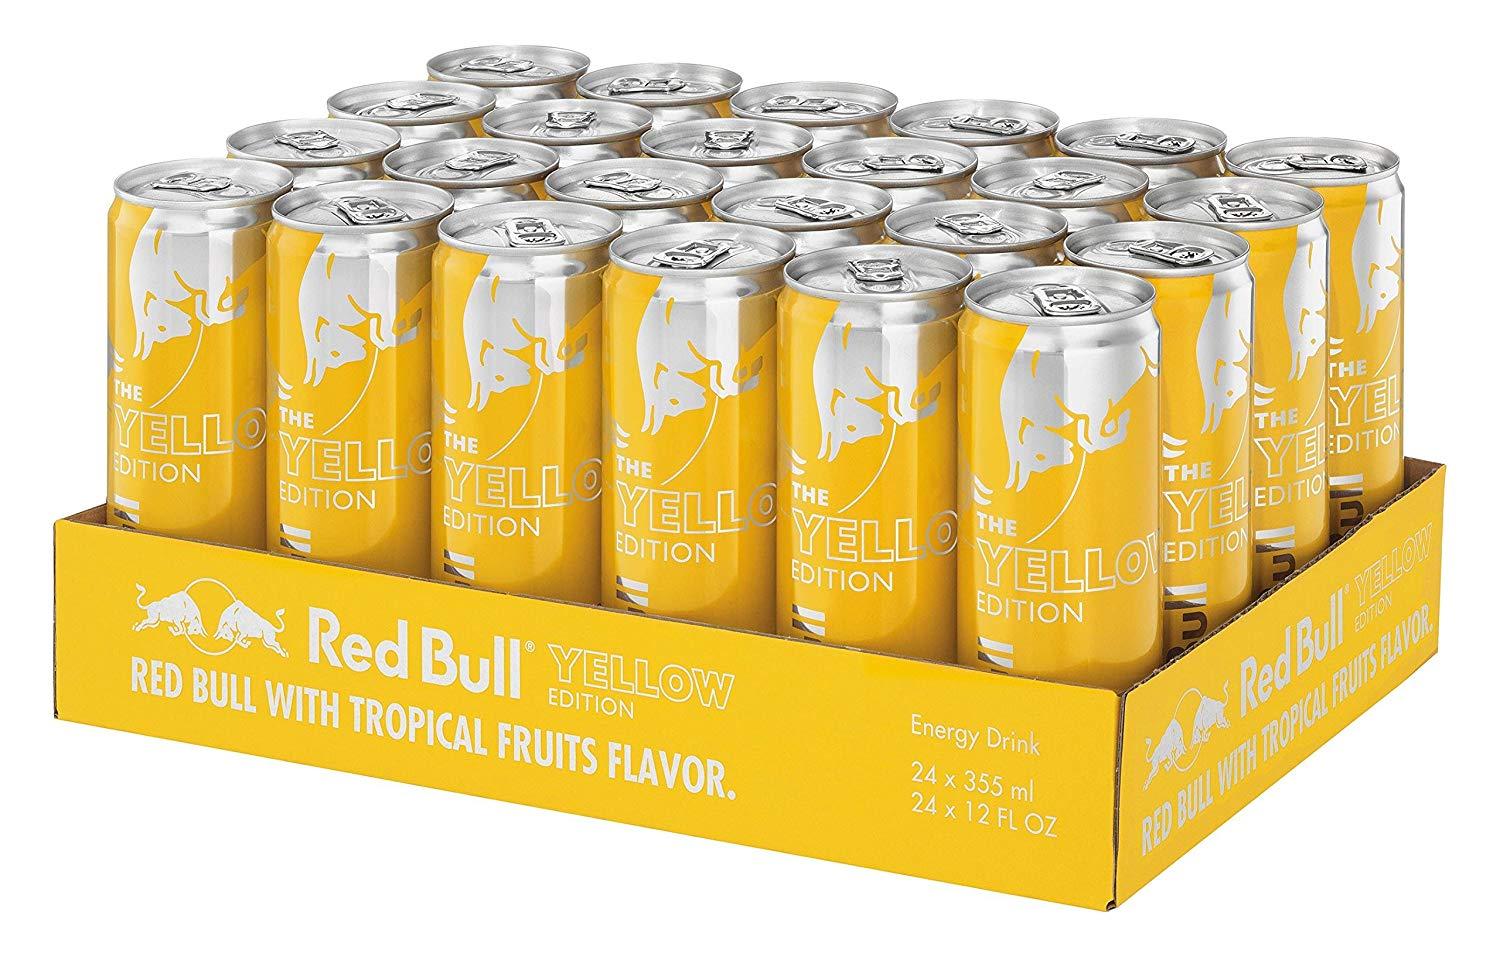 Red and Yellow Drink Logo - Amazon.com : Red Bull Energy Drink, Tropical, 24 Pack of 12 Fl Oz ...